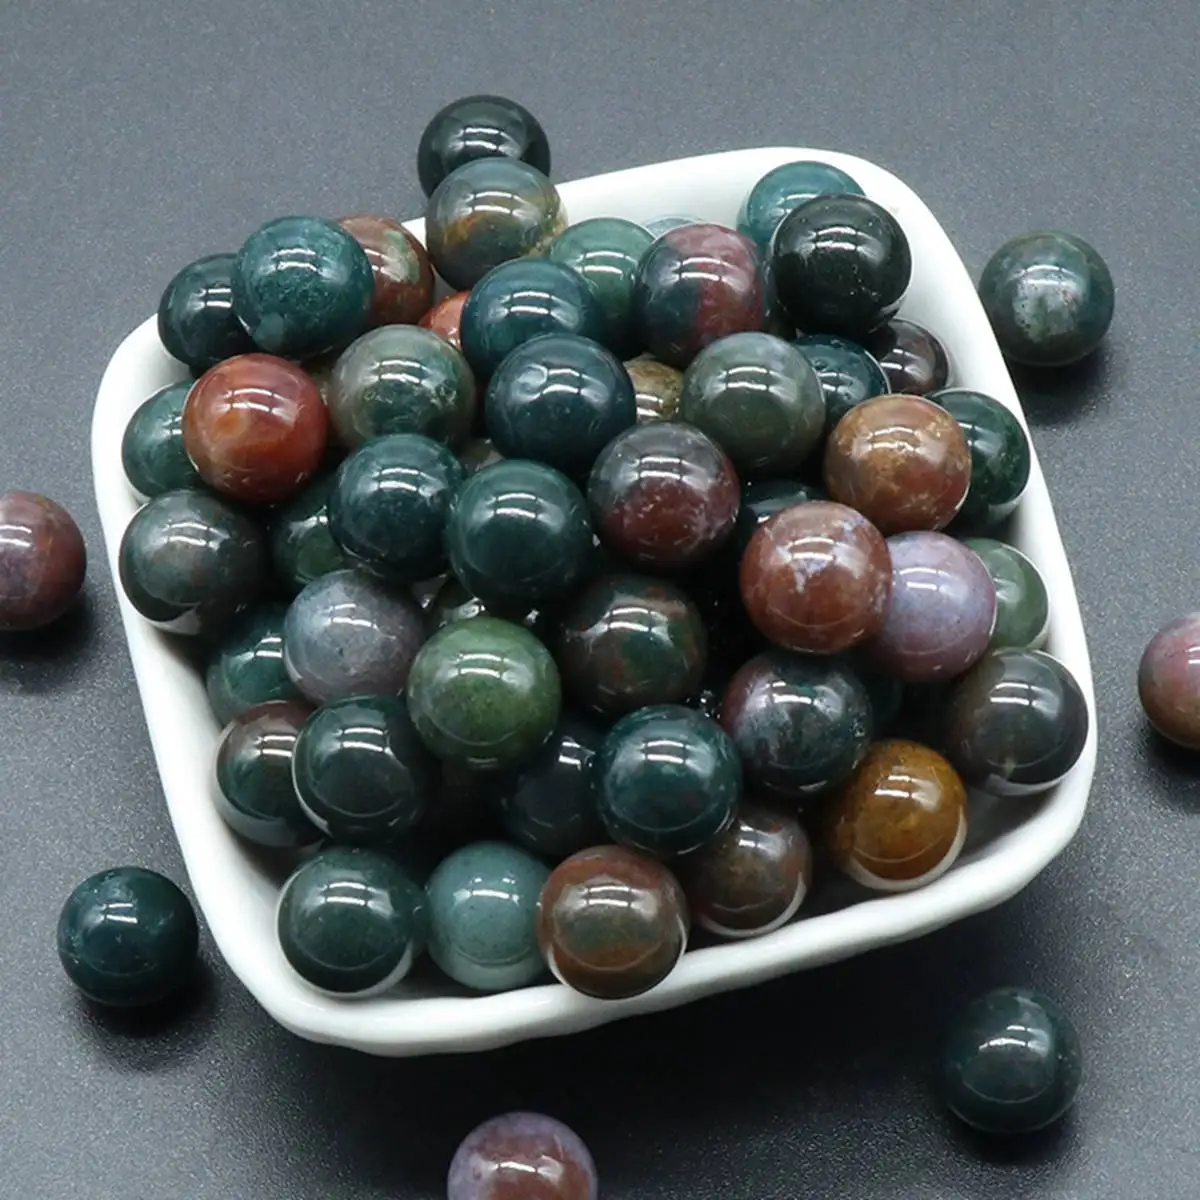 

5PCS 12MM Fancy Jasper Round Beads for Making Jewelry NO-Drilled Hole Healing Energy Natural Cute Stone Crystal Sphere Balls